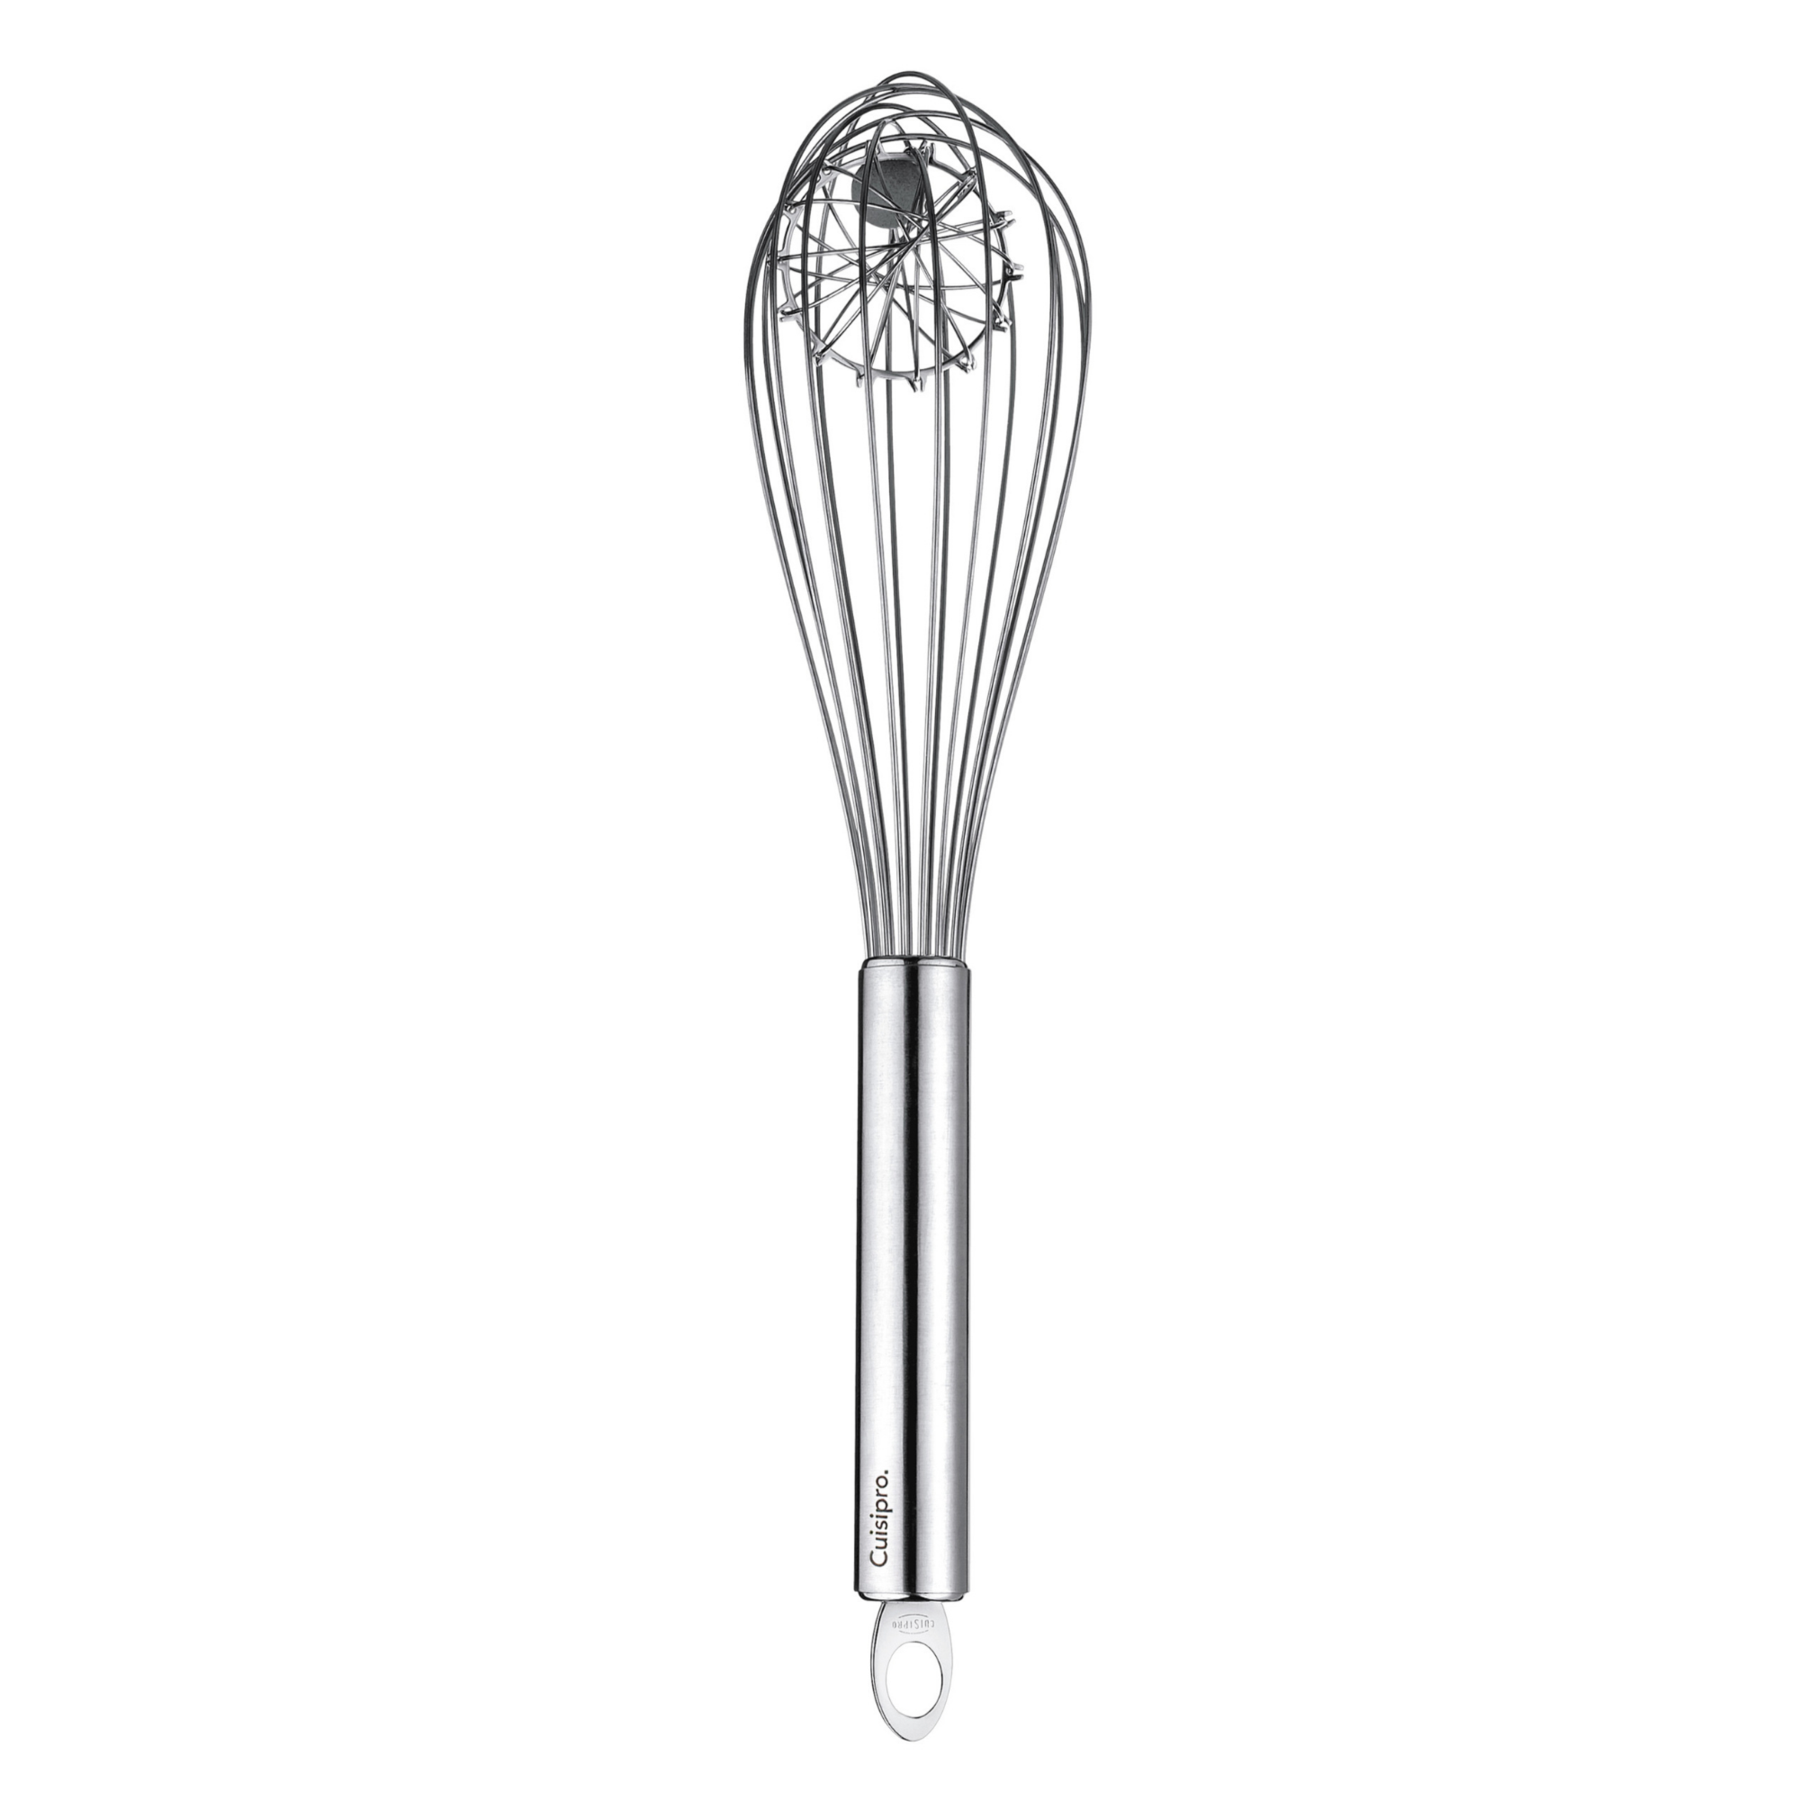 Fox Run Brands Set Of 4 Stainless Steel Mini Whisks For Beating Whipping  Mixing